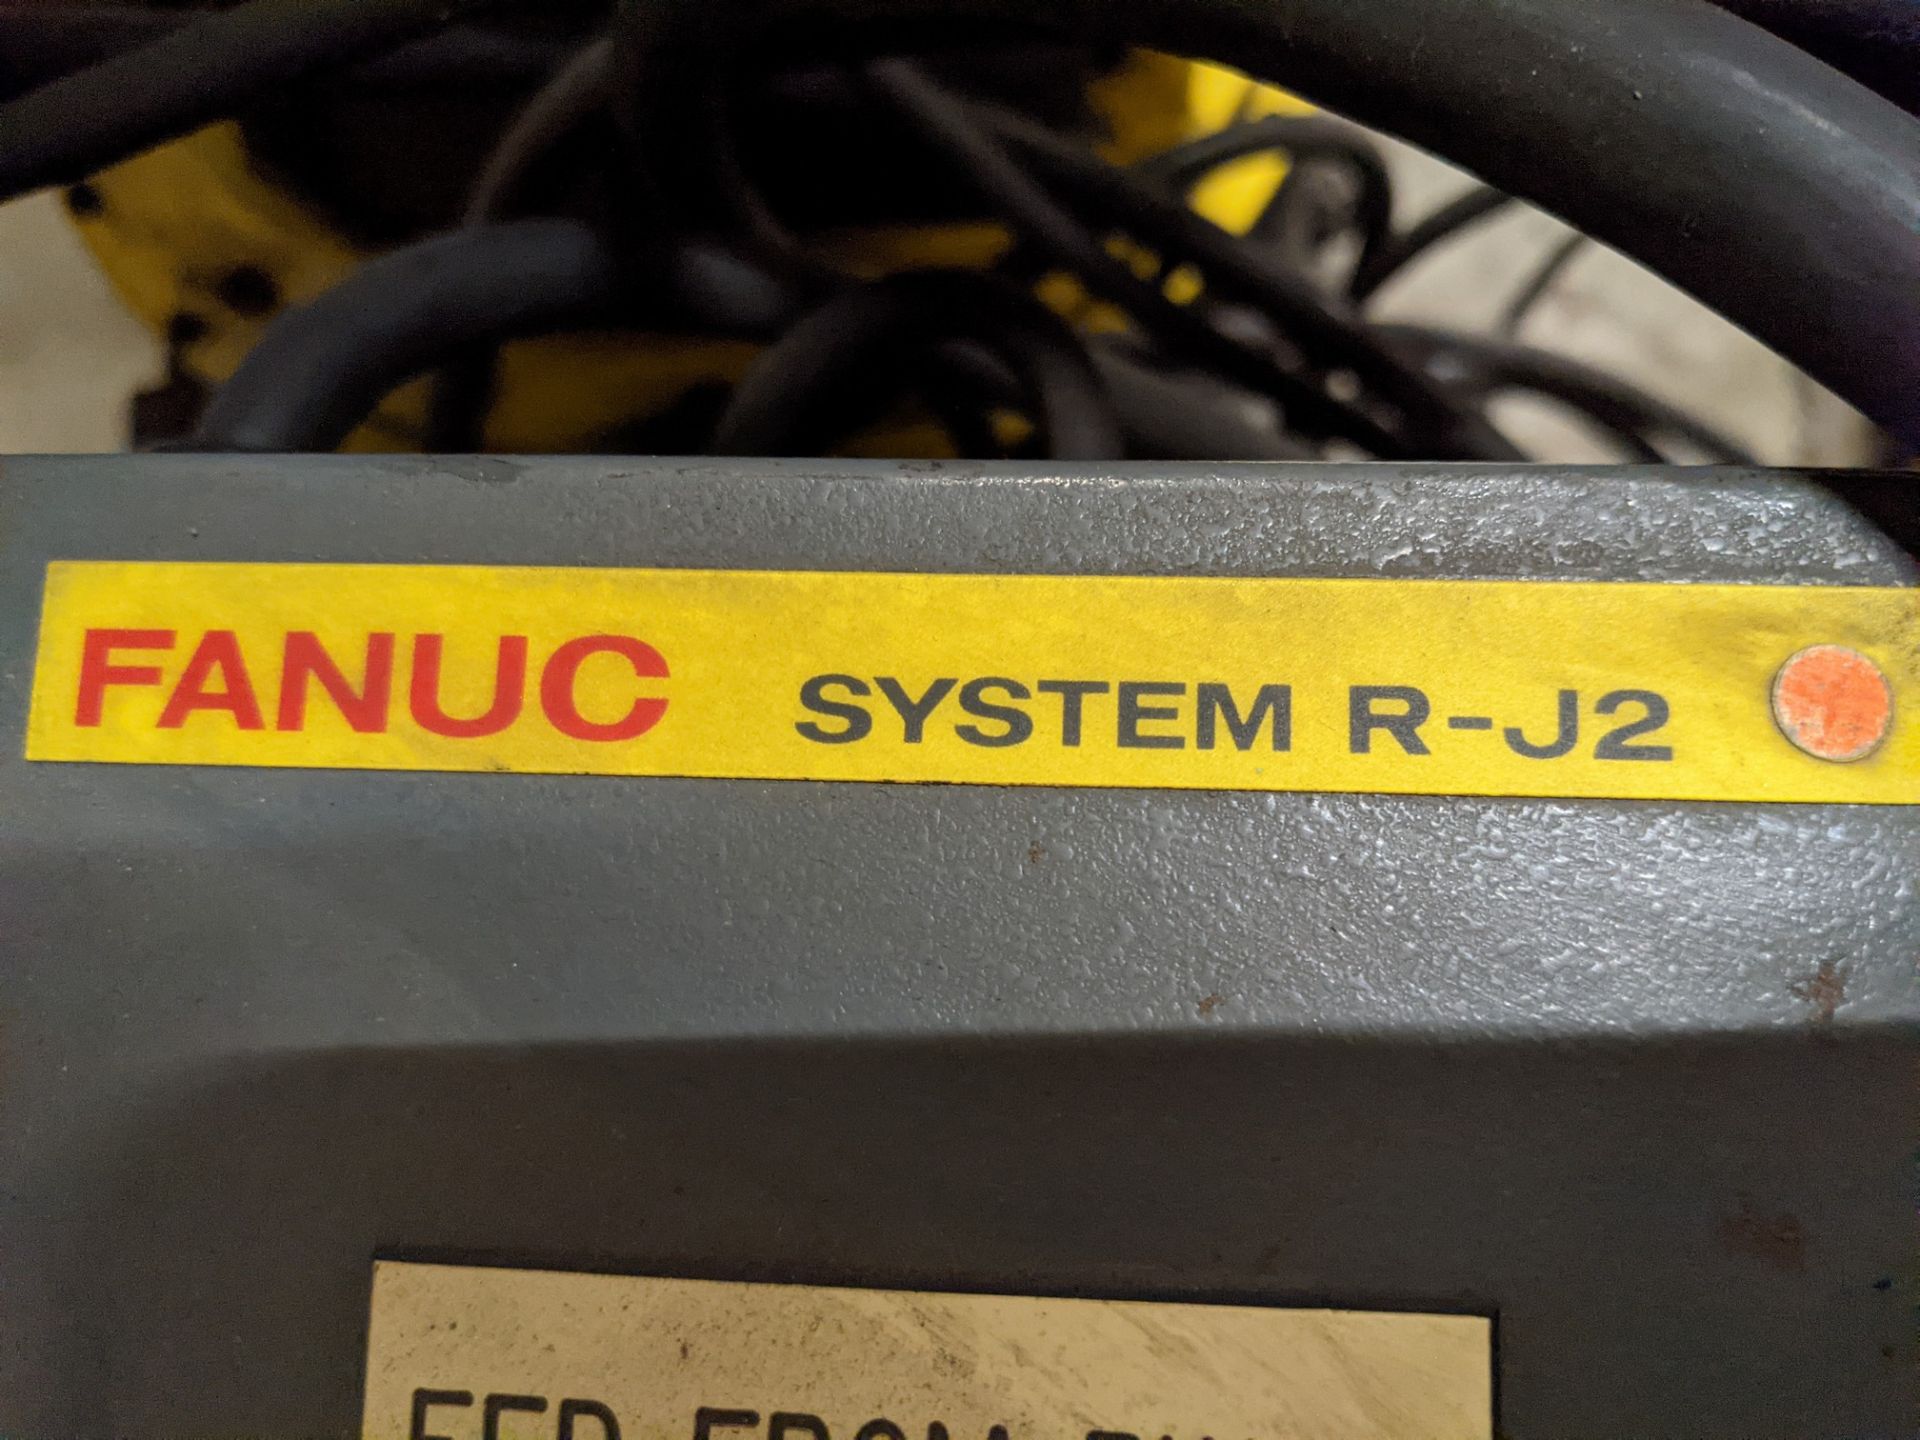 FANUC S-420IF ROBOT W/ FANUC SYSTEM R-J2 CONTROLLER, TYPE A05B-2350-B003, S/N E96902609 W/ PENDANT - Image 4 of 10